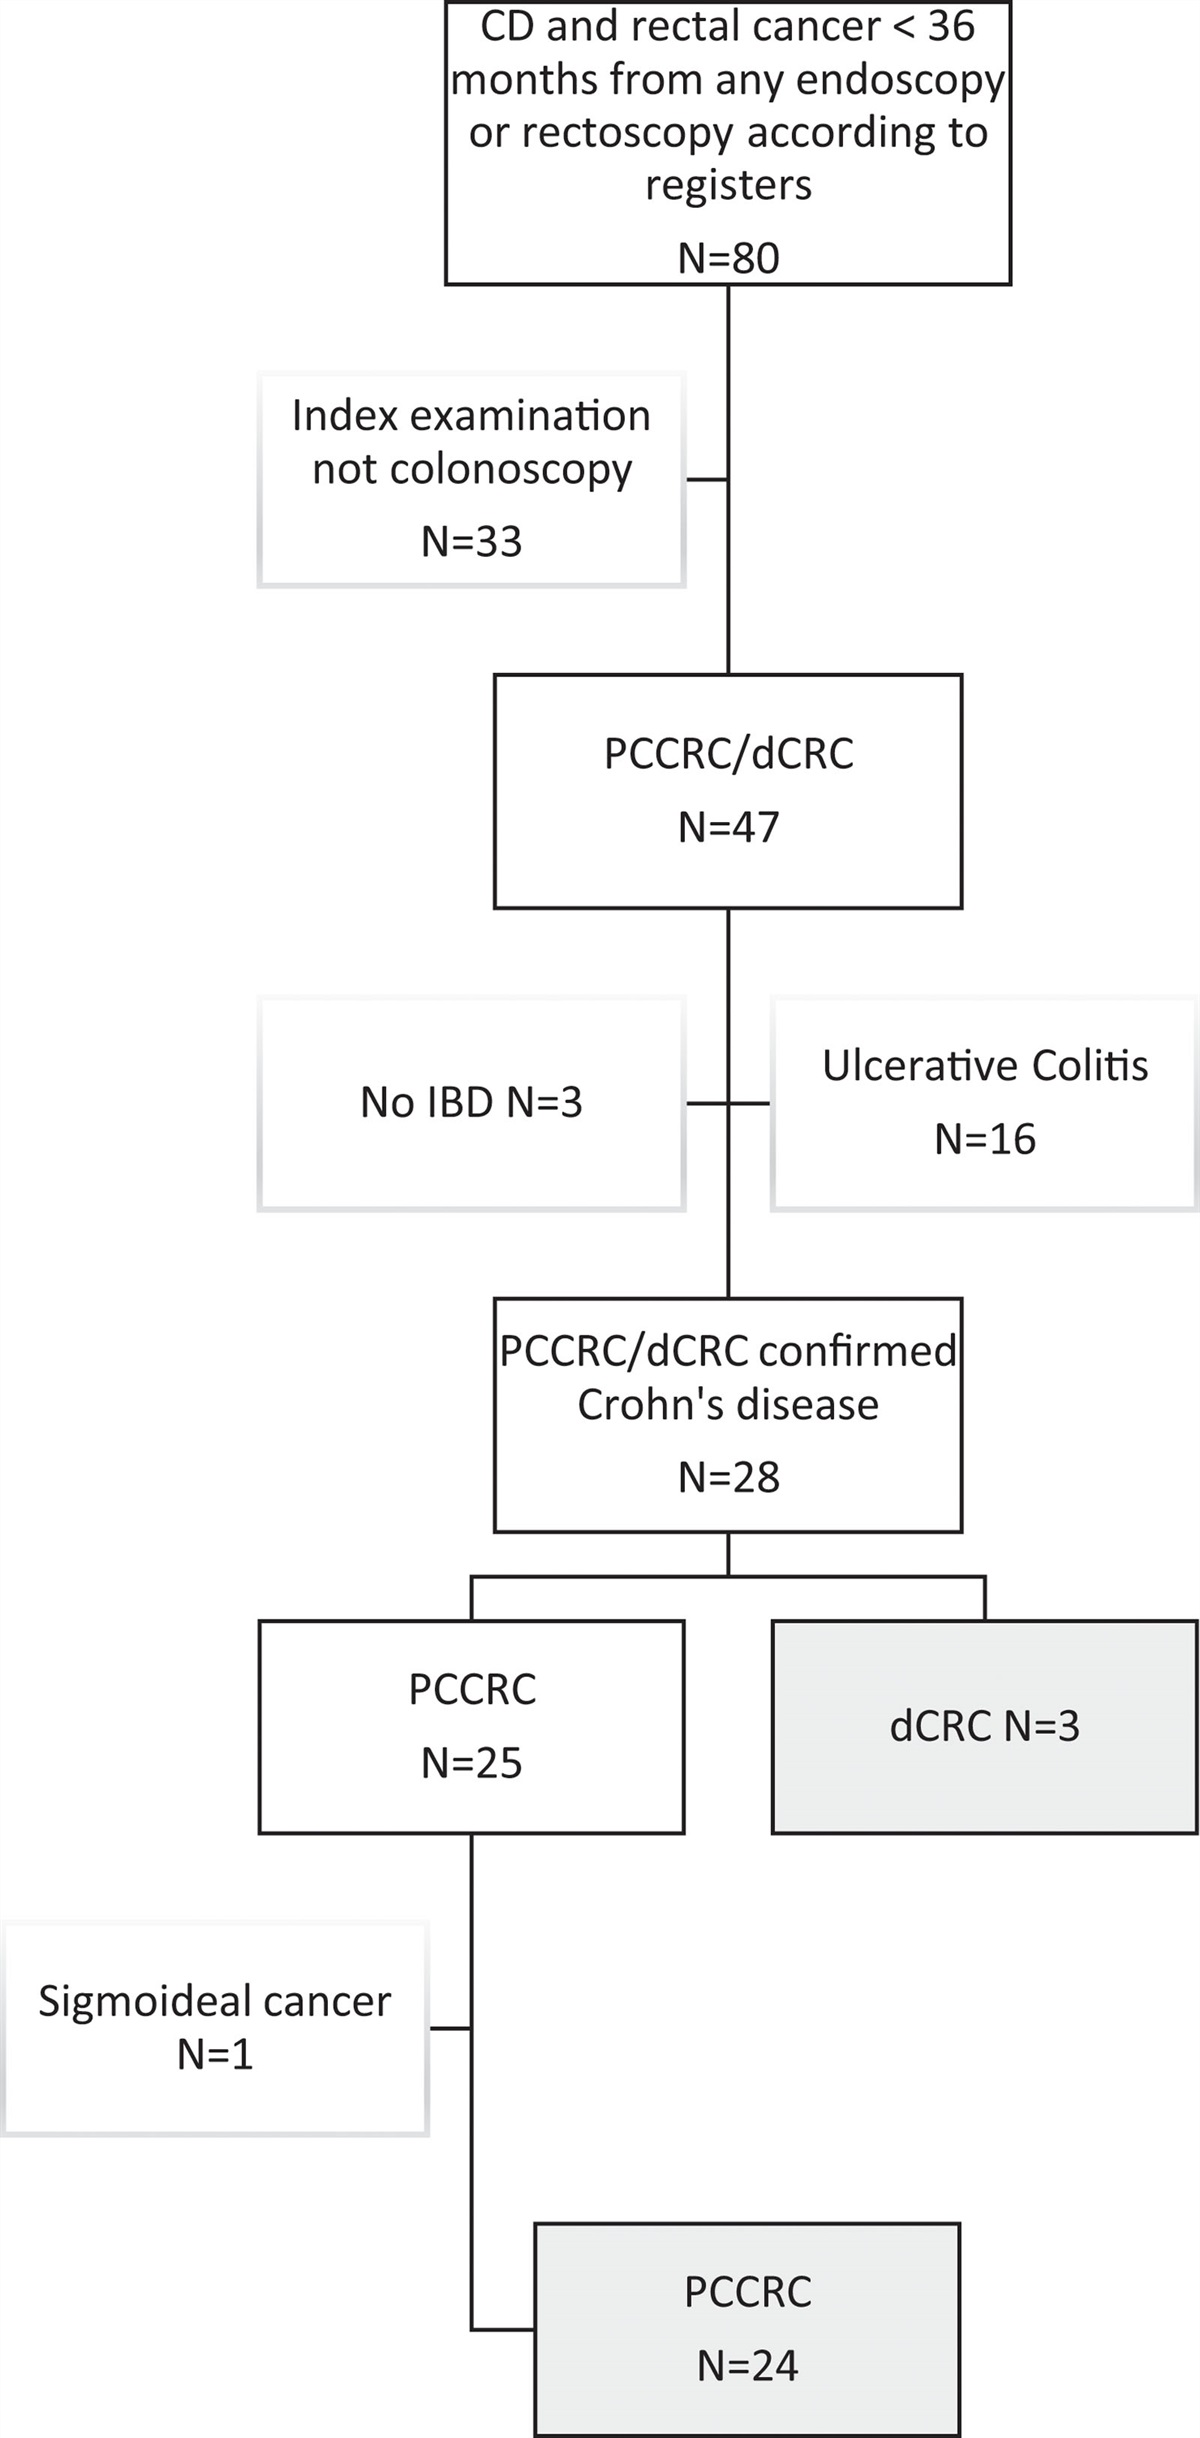 Post-colonoscopy rectal cancer in Swedish patients with Crohn’s disease 2001–2015: a population-based case review study